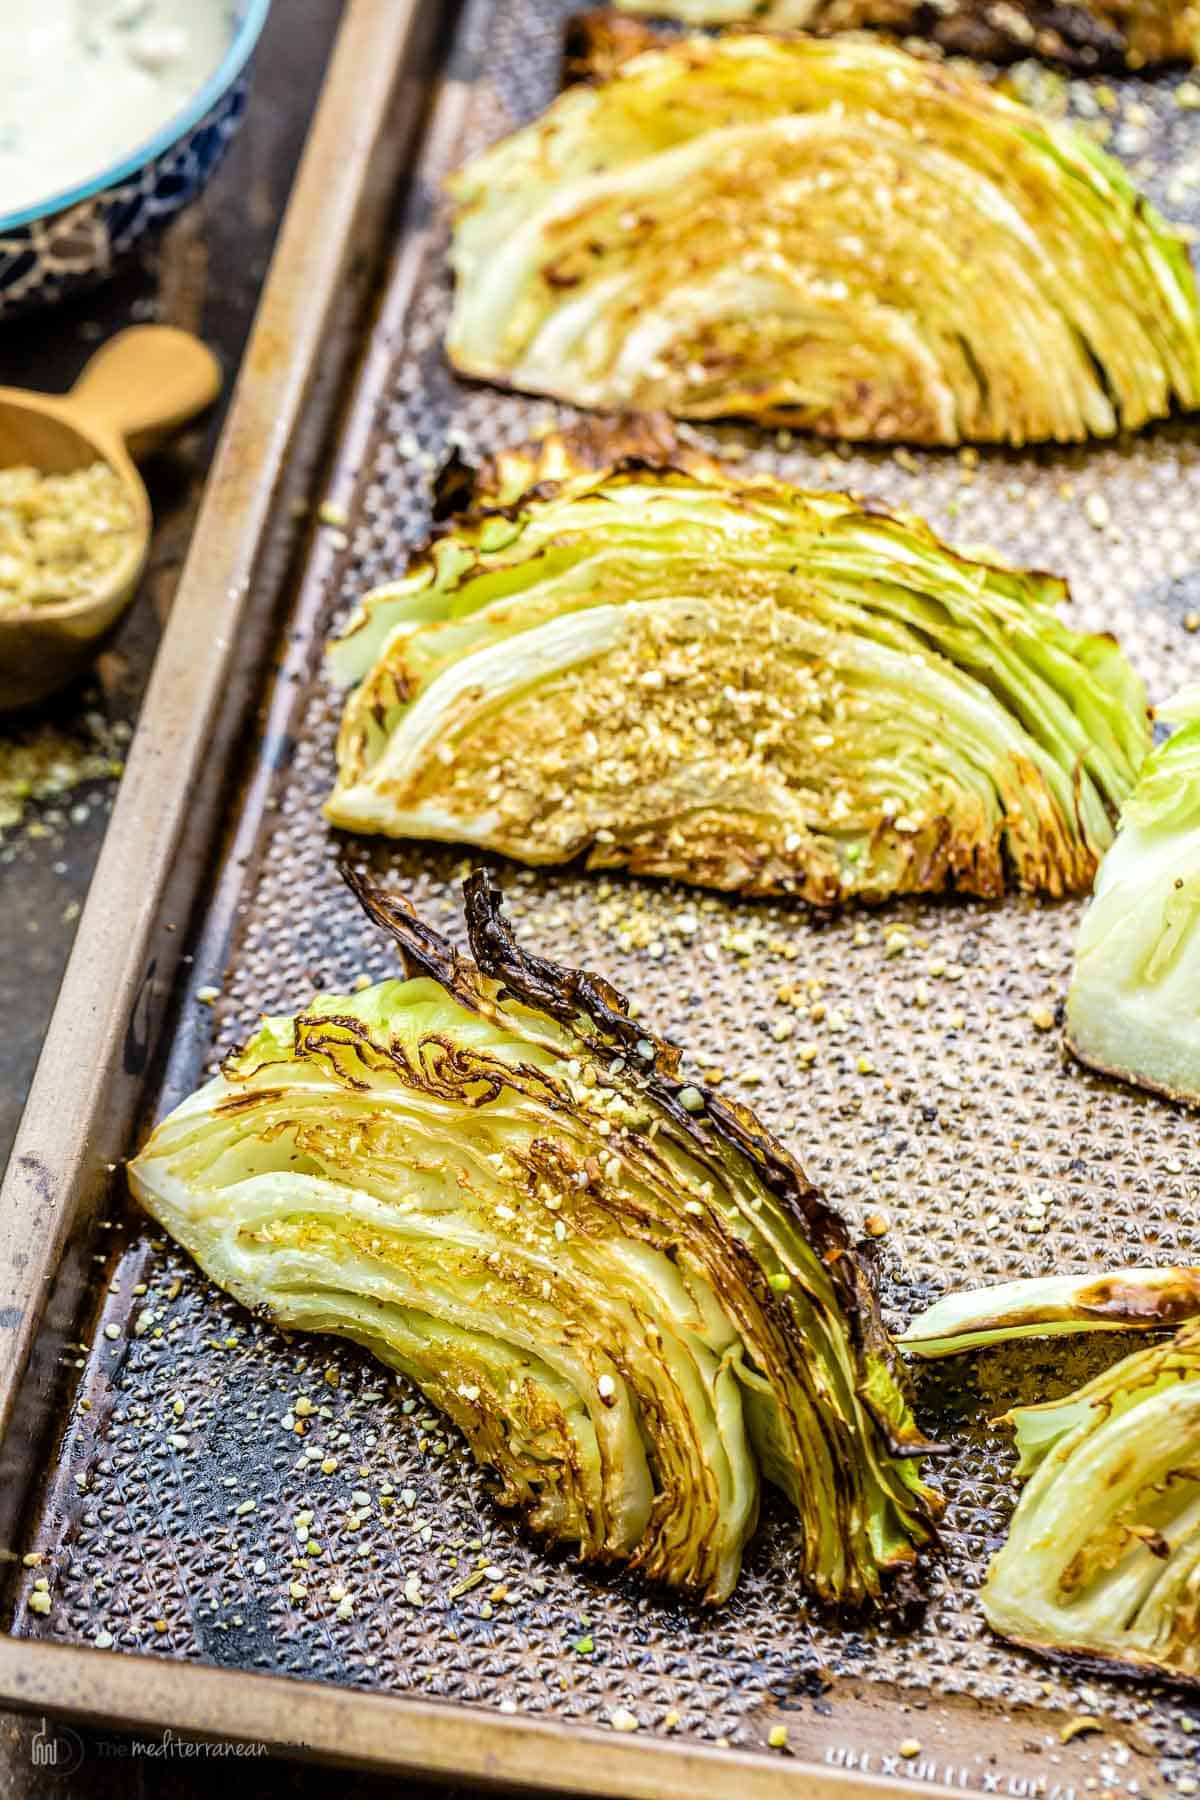 Charred cabbage wedges on a baking sheet